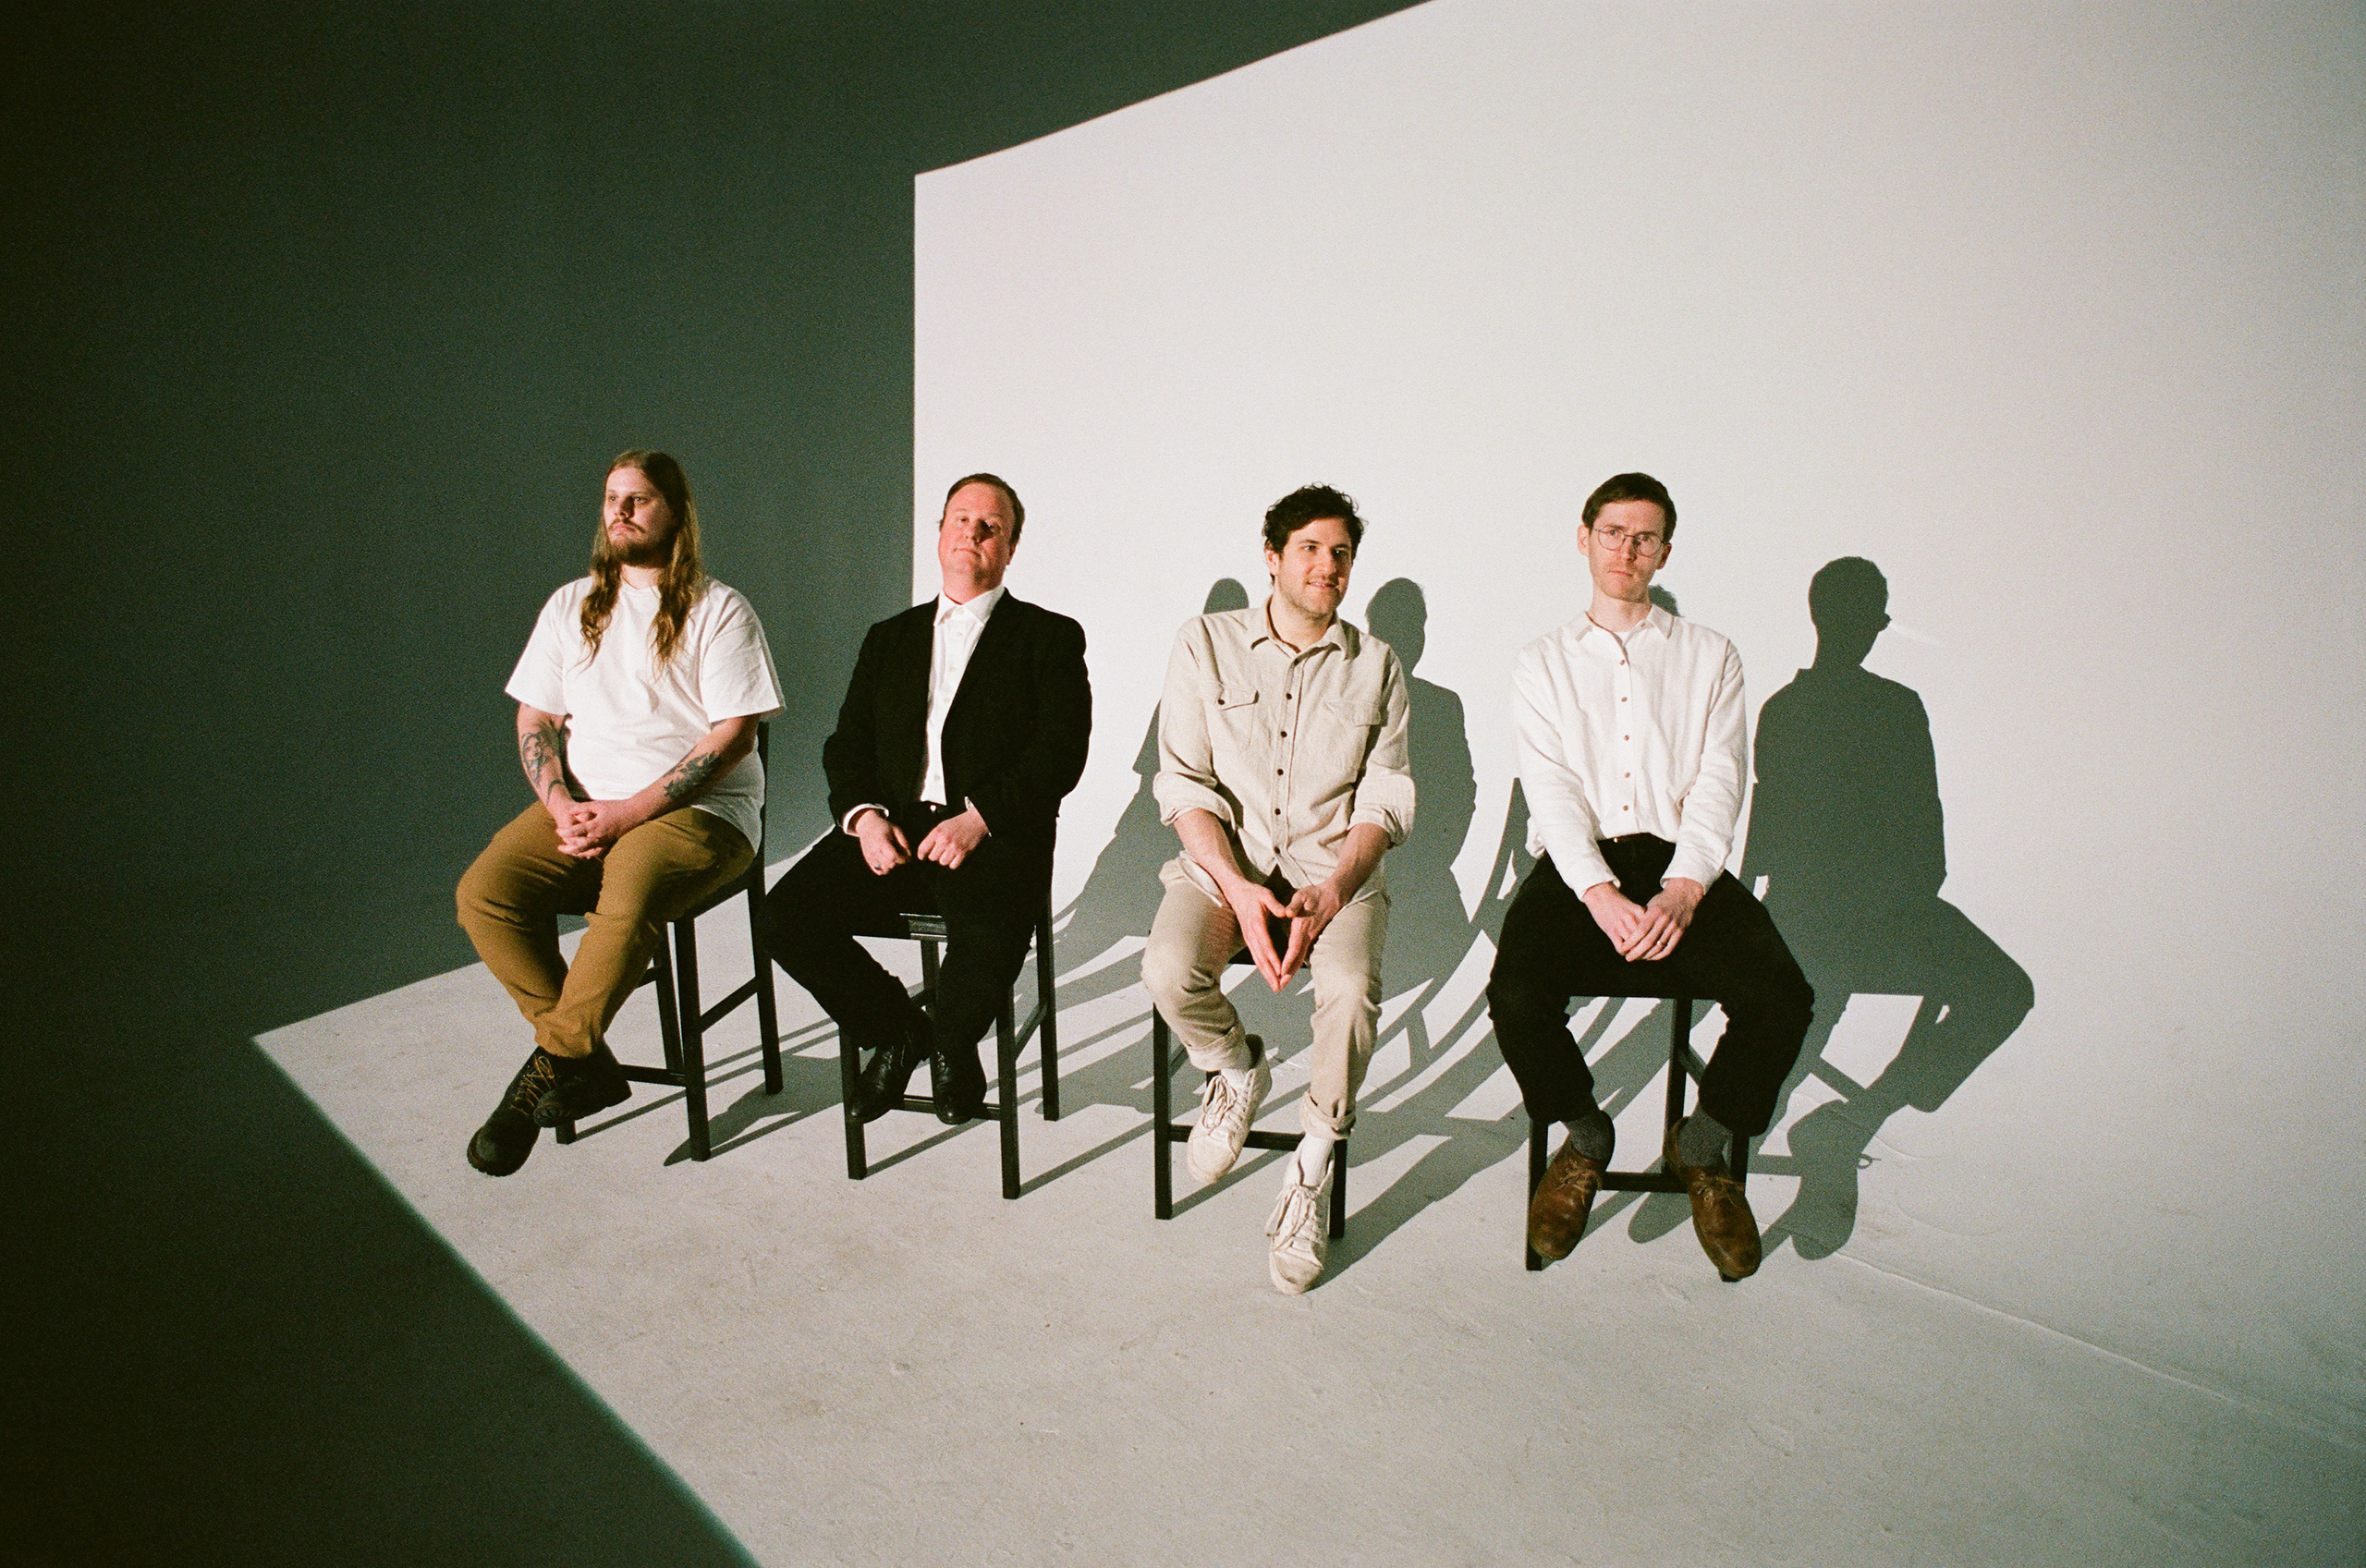 The form band members of Protomartyr sit on a row of chairs in a in a black and white room